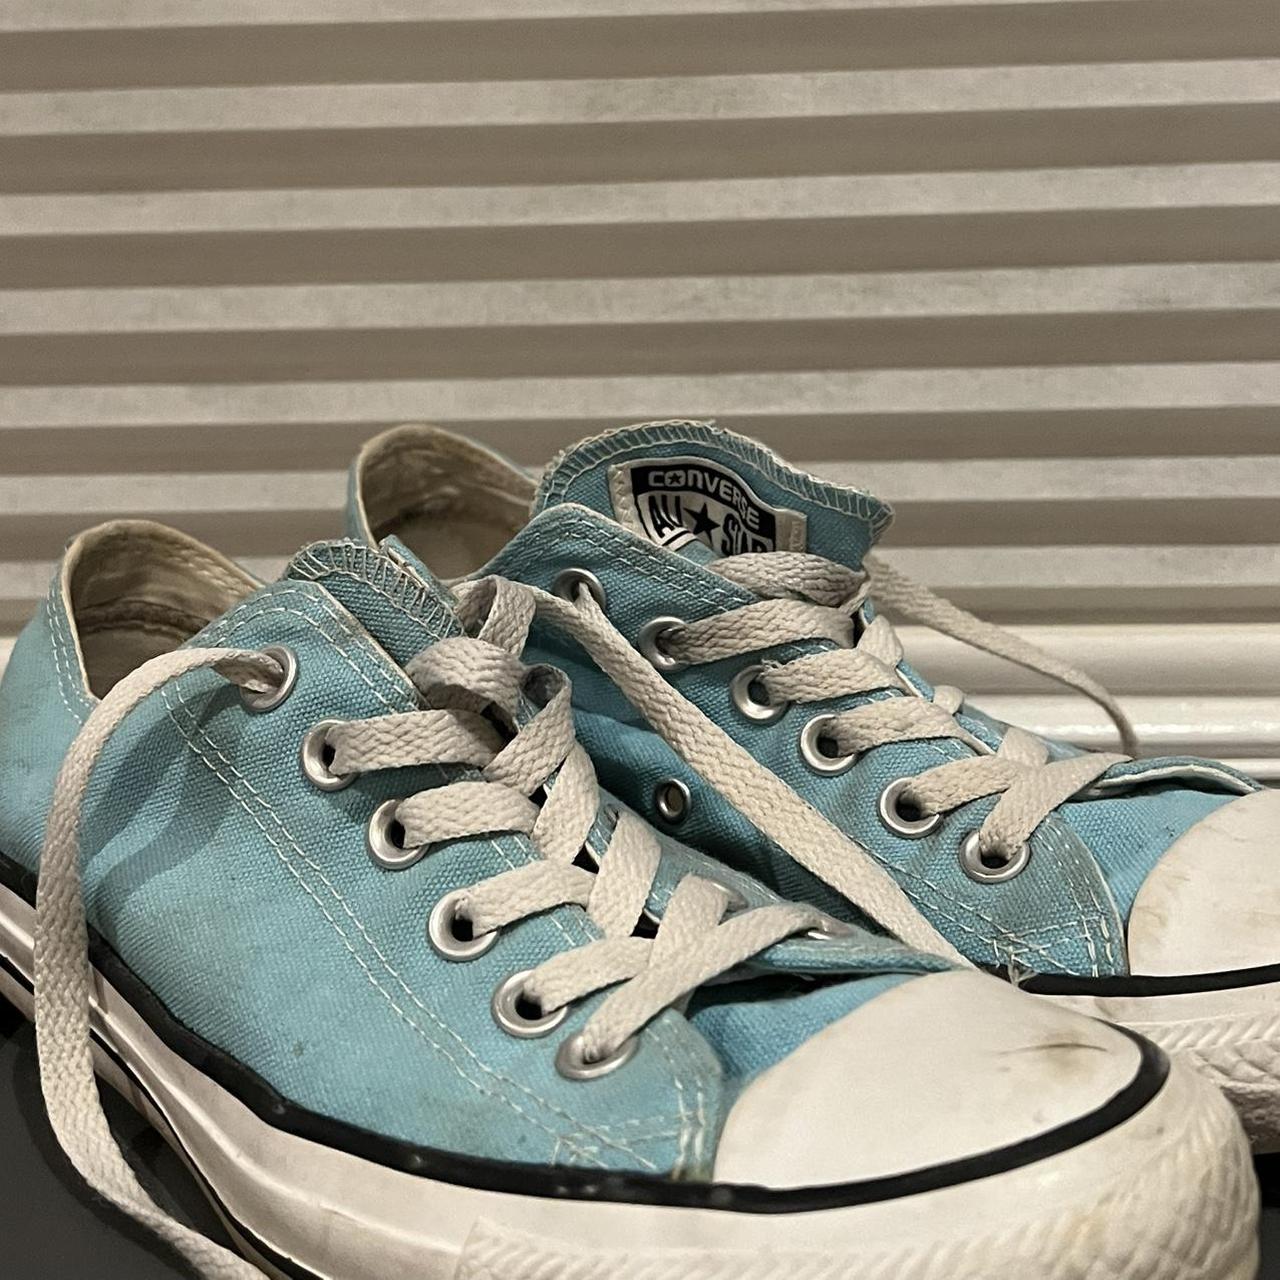 VINTAGE CONVERSE sneakers (light turquoise / blue)...